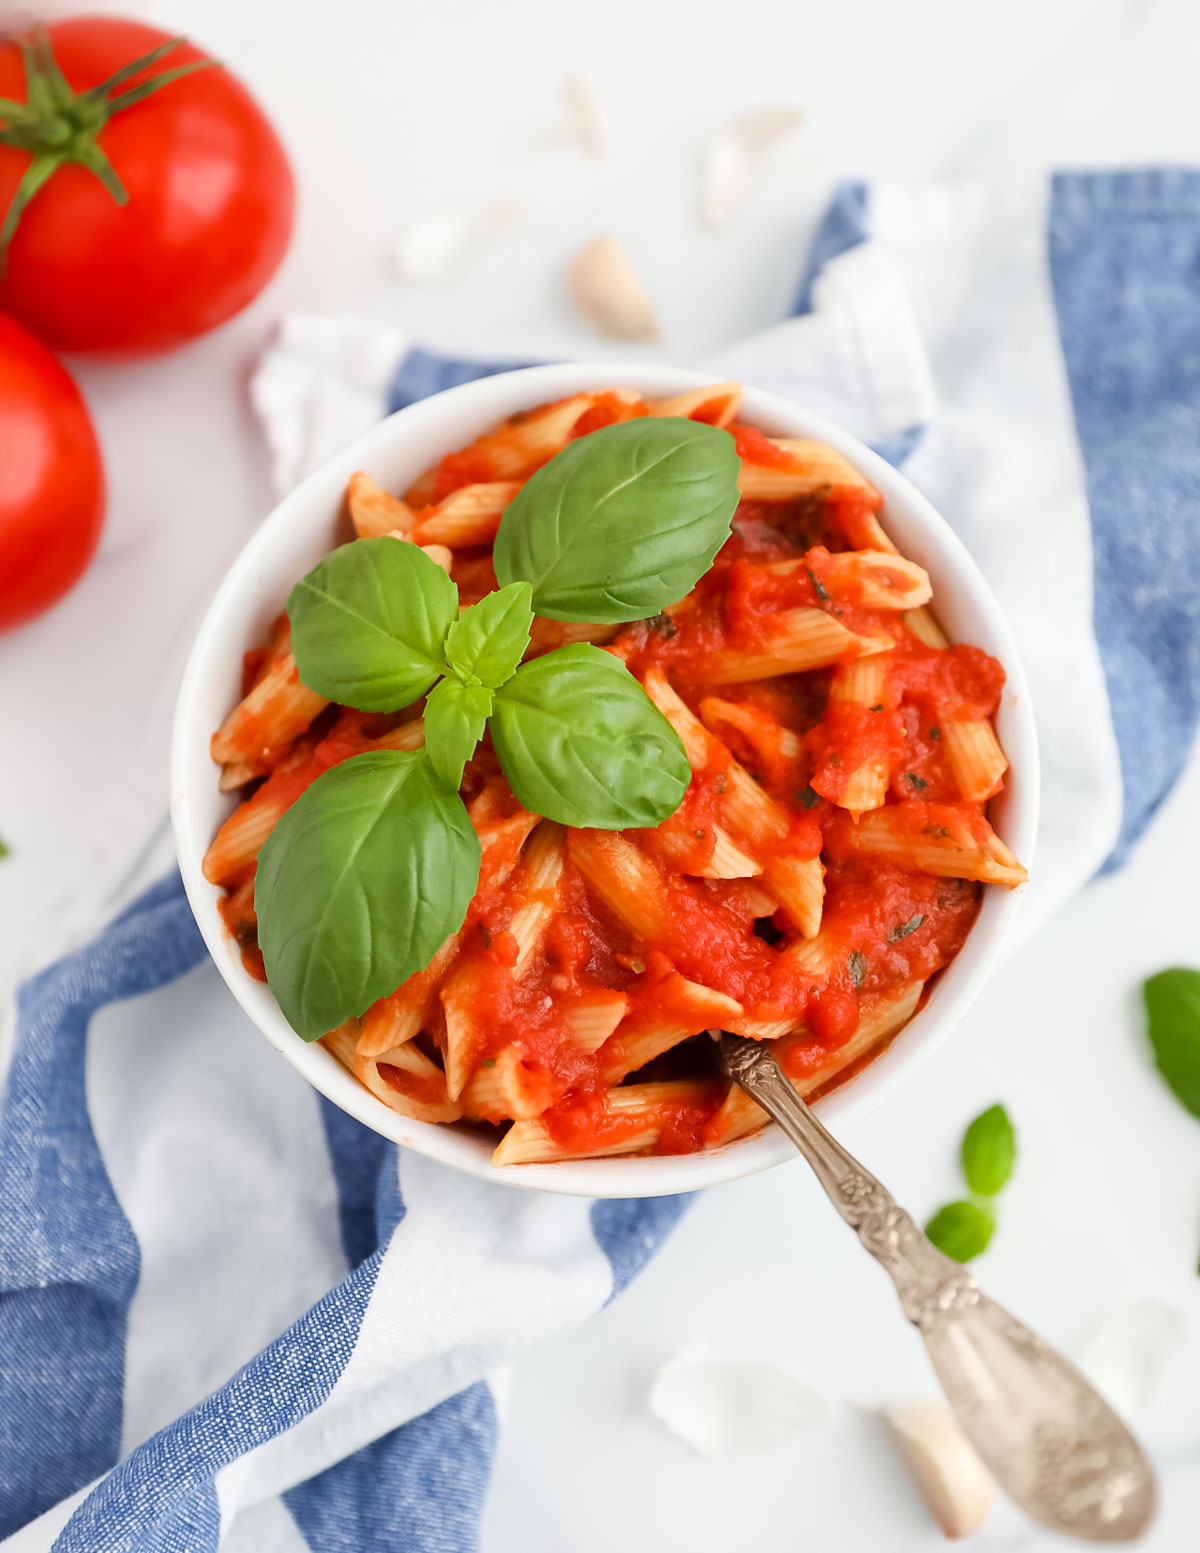 A bowl of penne pasta with pomodoro sauce garnished with a fork and a fresh sprig of green basil